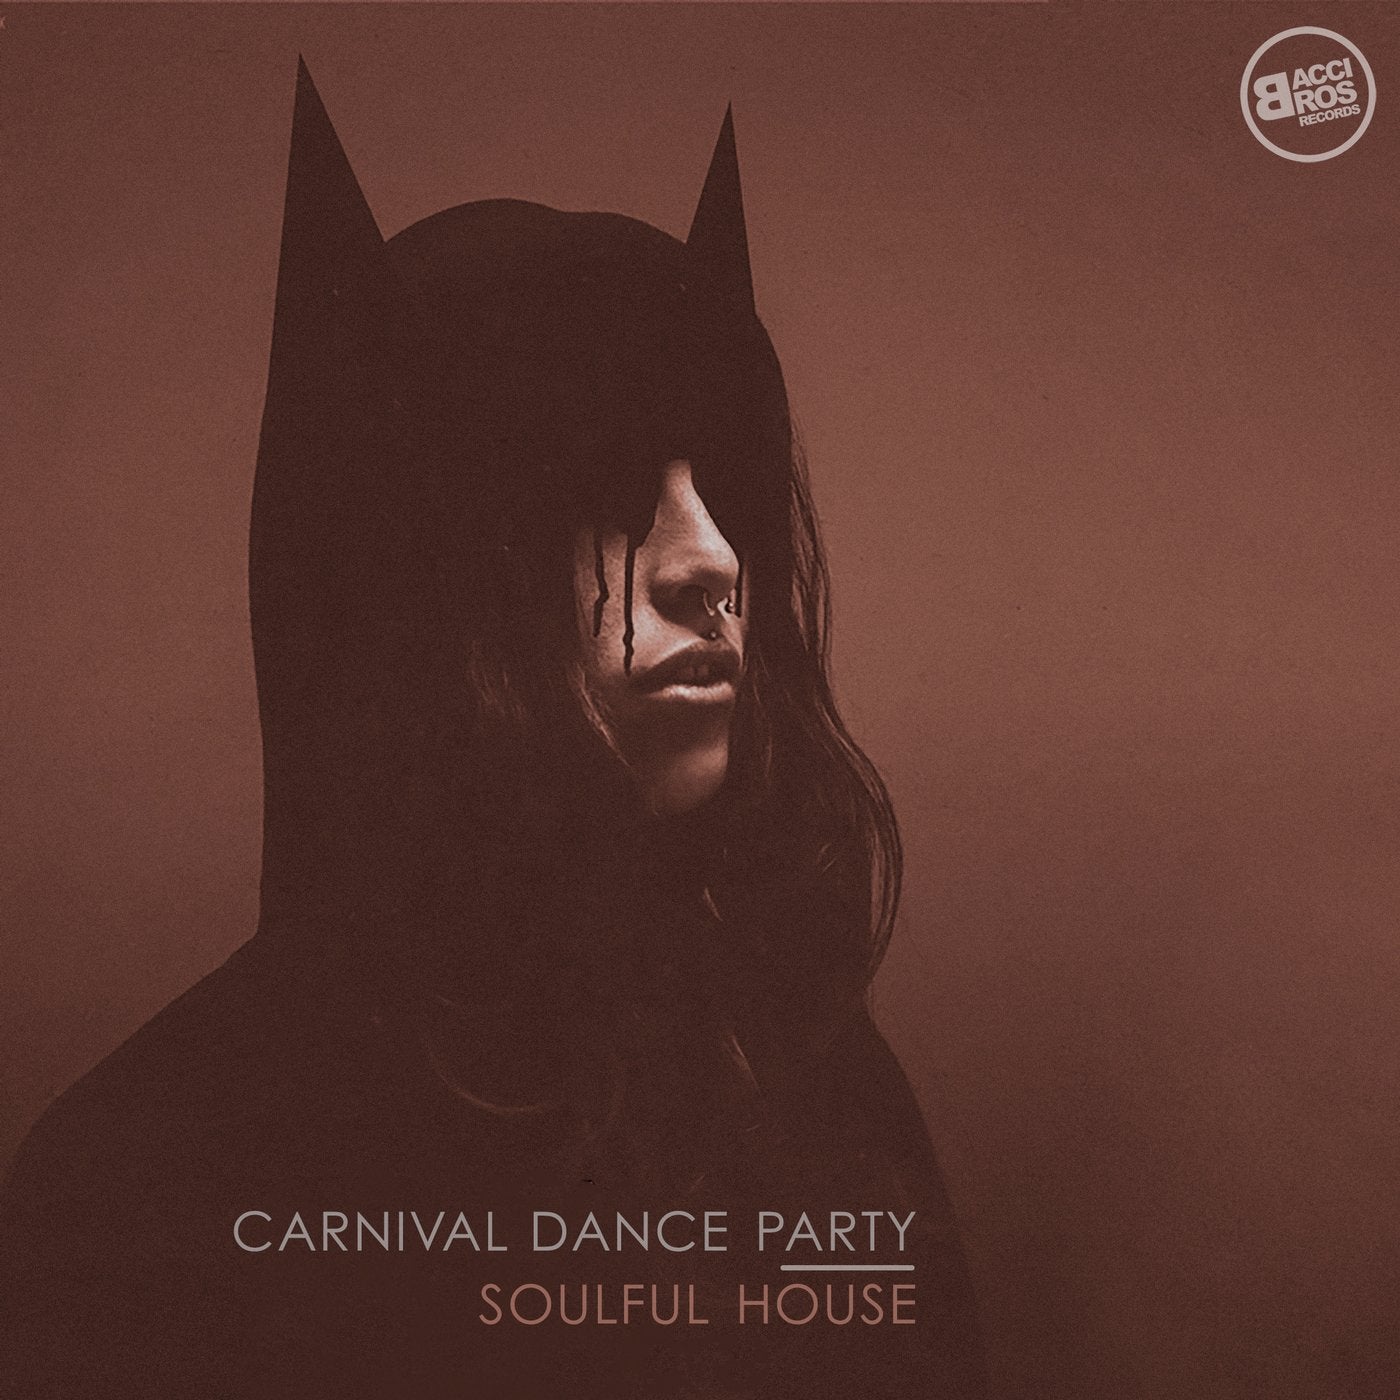 Carnival Dance Party: Soulful House